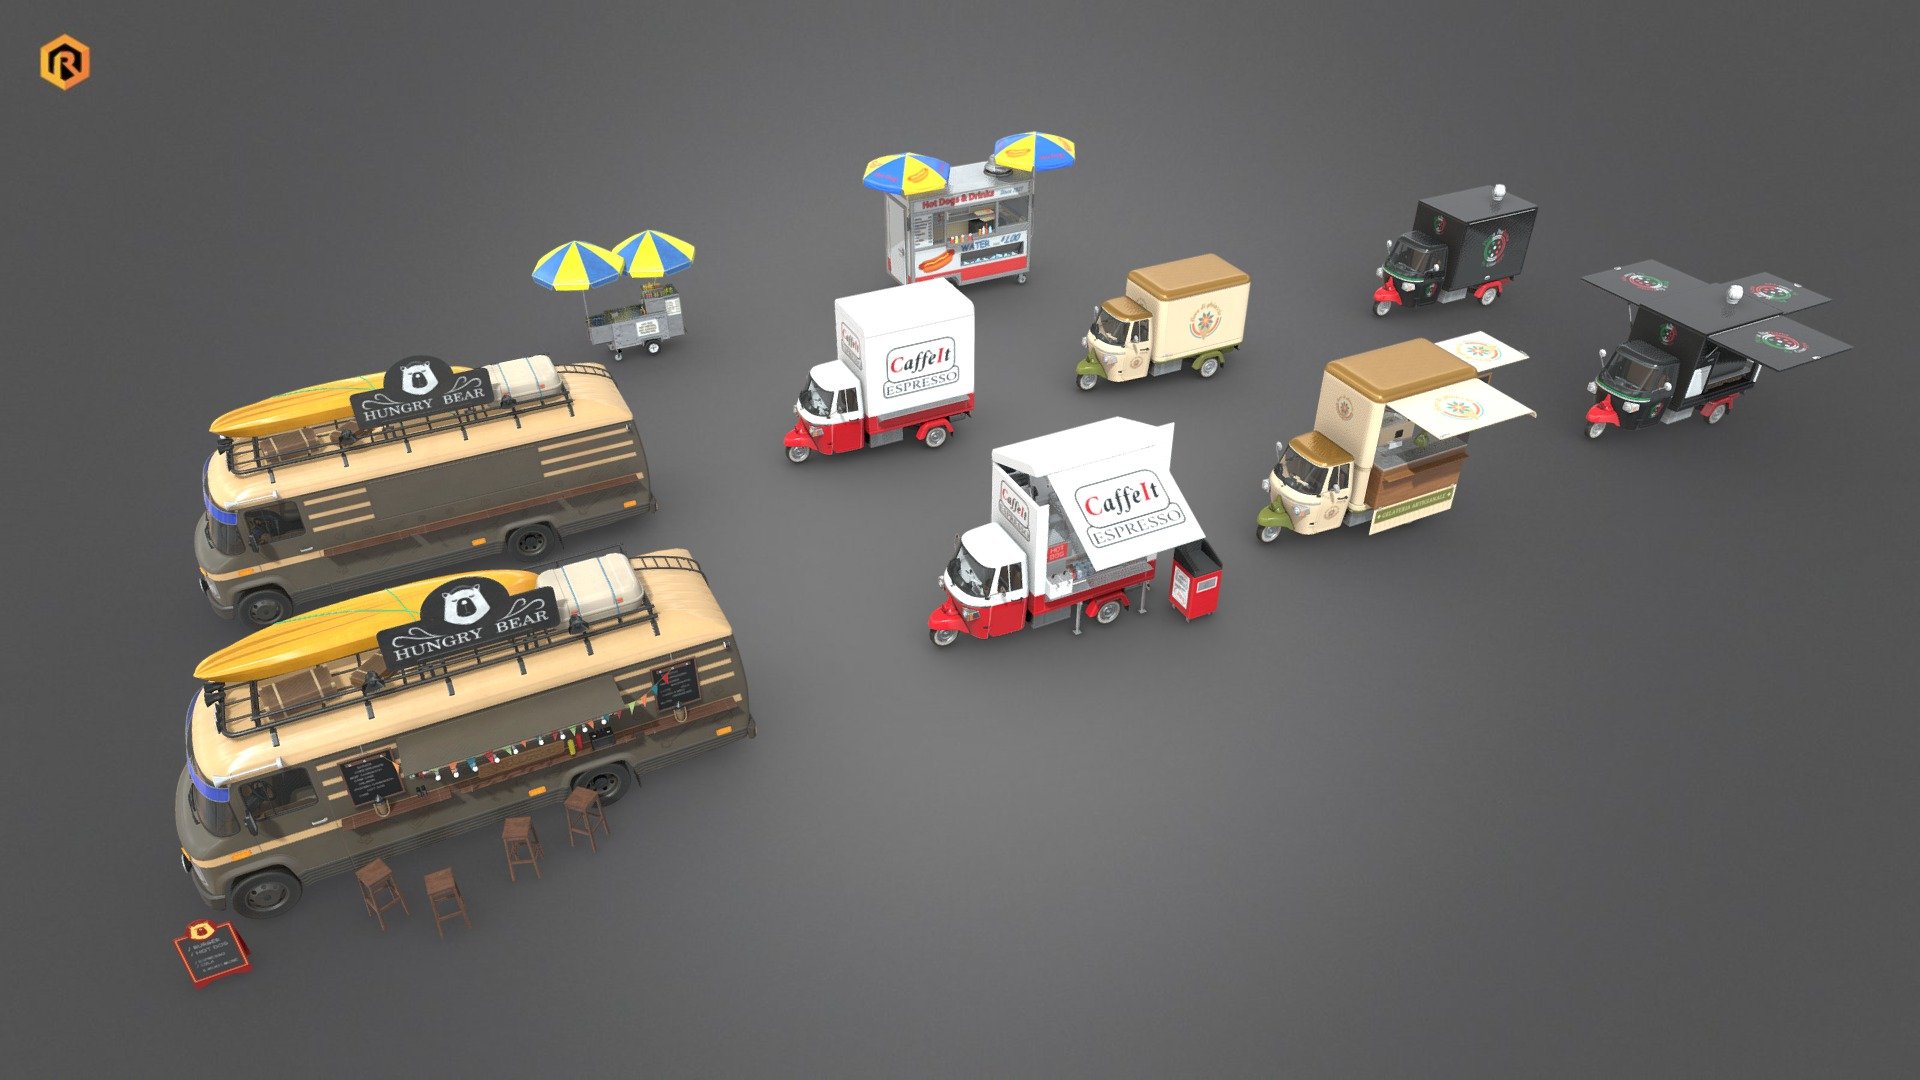 6 low-poly PBR 3D models of Food Trucks.

The interior part of the cabins are also modeled and textured. Most of them have an open and closed version of the model. These models are best for use in games and real-time applications. It can also be rendered in Blender (ex Cycles) or Vray.

**Technical details: ** 




The number of triangles varies between 10800 - 59000 triangles.

Blender, Unity and Unreal Engine files included.  

Lot of additional file formats included (Blender, Unity, UE4, Maya etc.)   

**IMPORTANT: Due to the 2gb file size limitation on SketchFab, I had to split this package into 2 parts. First is downloadable right after purchase but some secondary files (mainly example scenes and UE4 files) will be available for download from another source (Google Drive). The link to the additional materials will be in the package after purchase. **

Please feel free to contact me if you have any questions or need any support for this asset.

Support e-mail: support@rescue3d.com - 6  Food Trucks - Buy Royalty Free 3D model by Rescue3D Assets (@rescue3d) 3d model